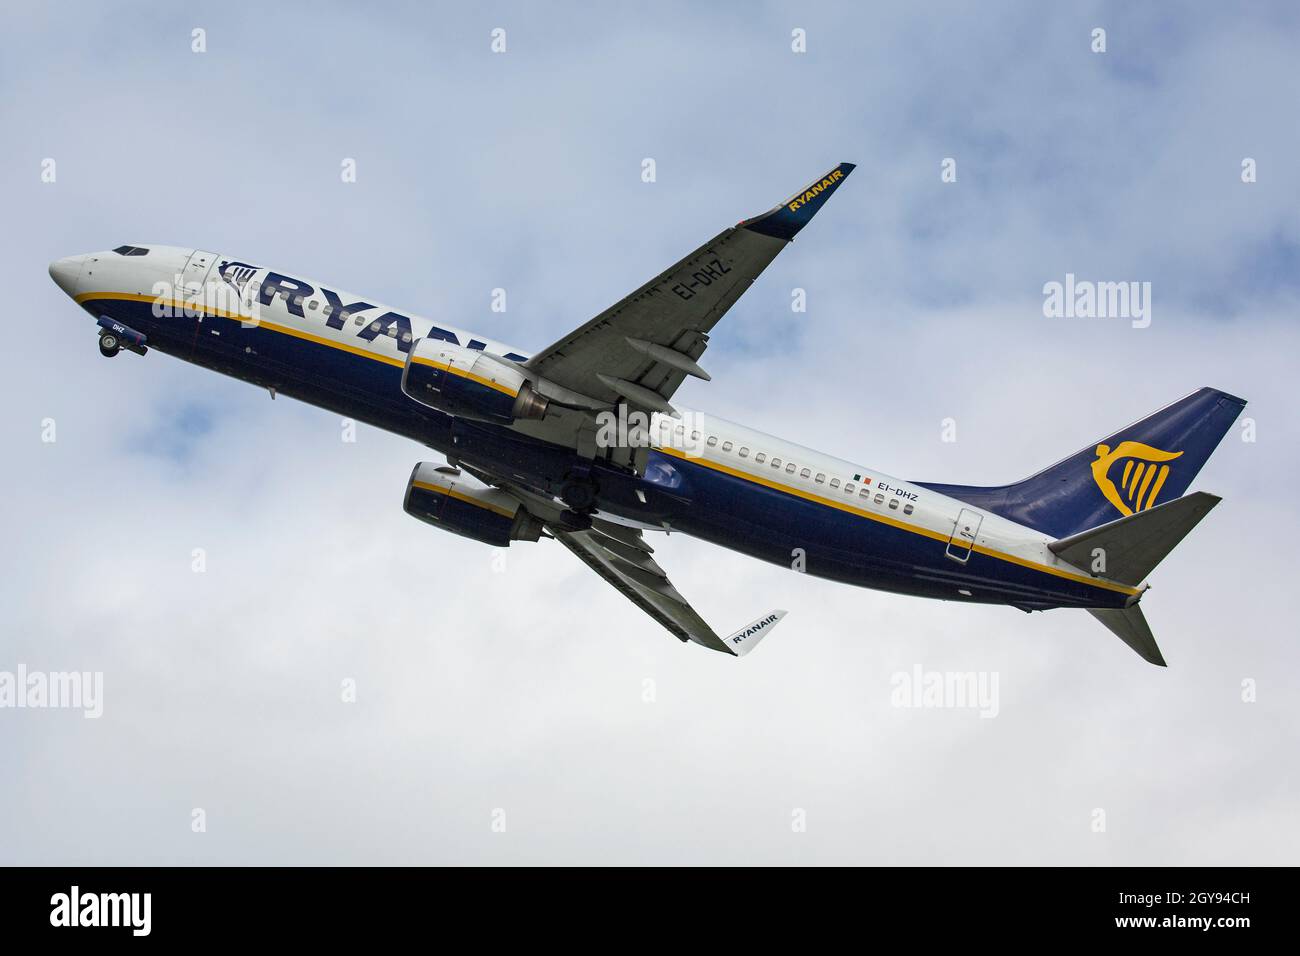 A Ryanair Boeing 737-800 Airliner, EI-DHZ, taking off at Bristol Lulsgate Airport, England. Stock Photo